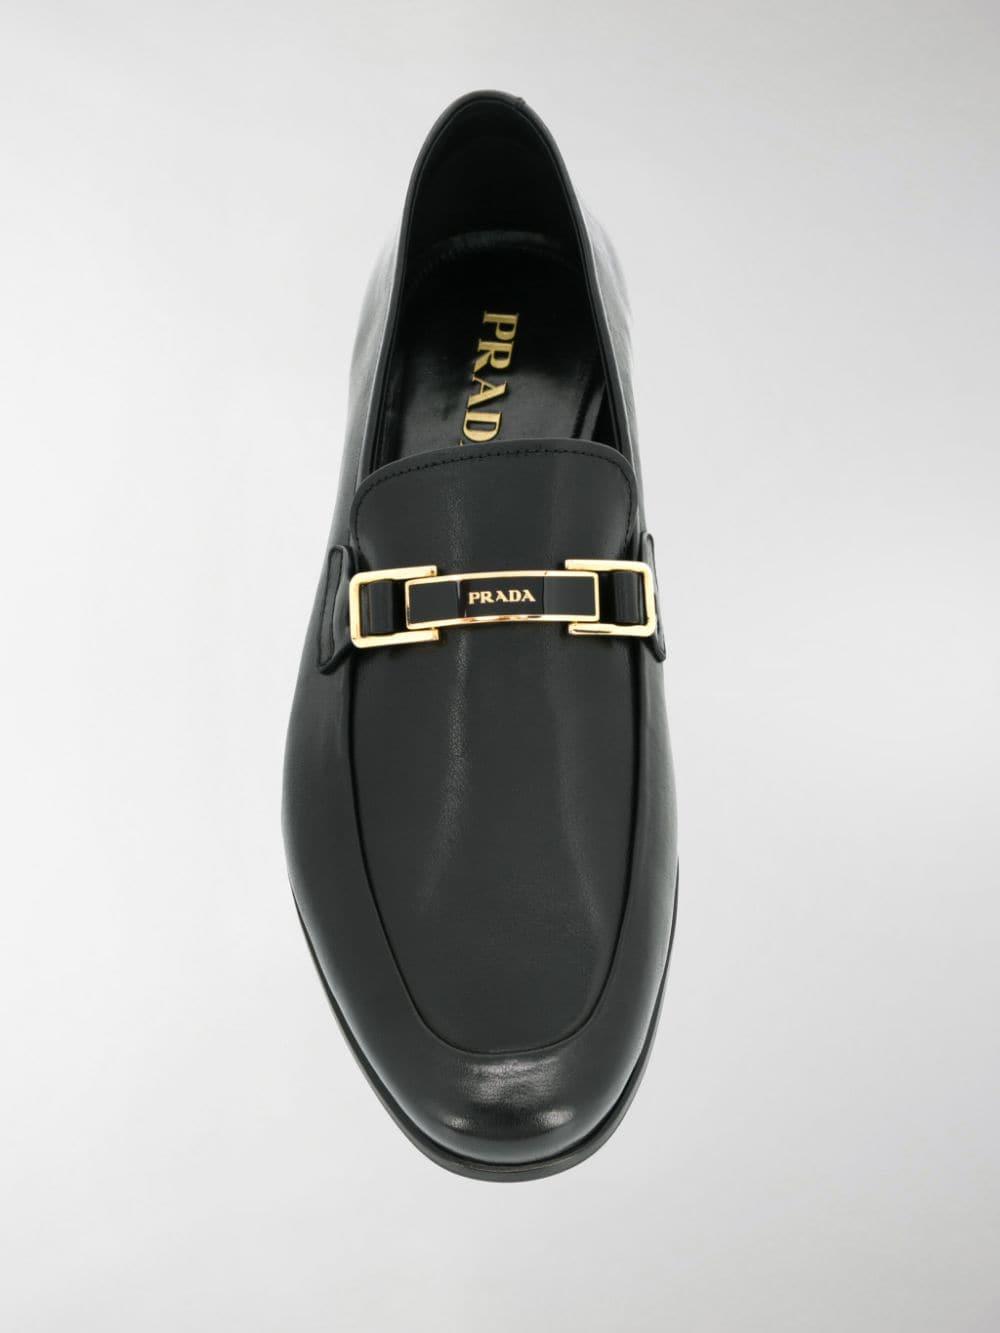 Prada Leather Logo Plaque Loafers in Black for Men - Lyst